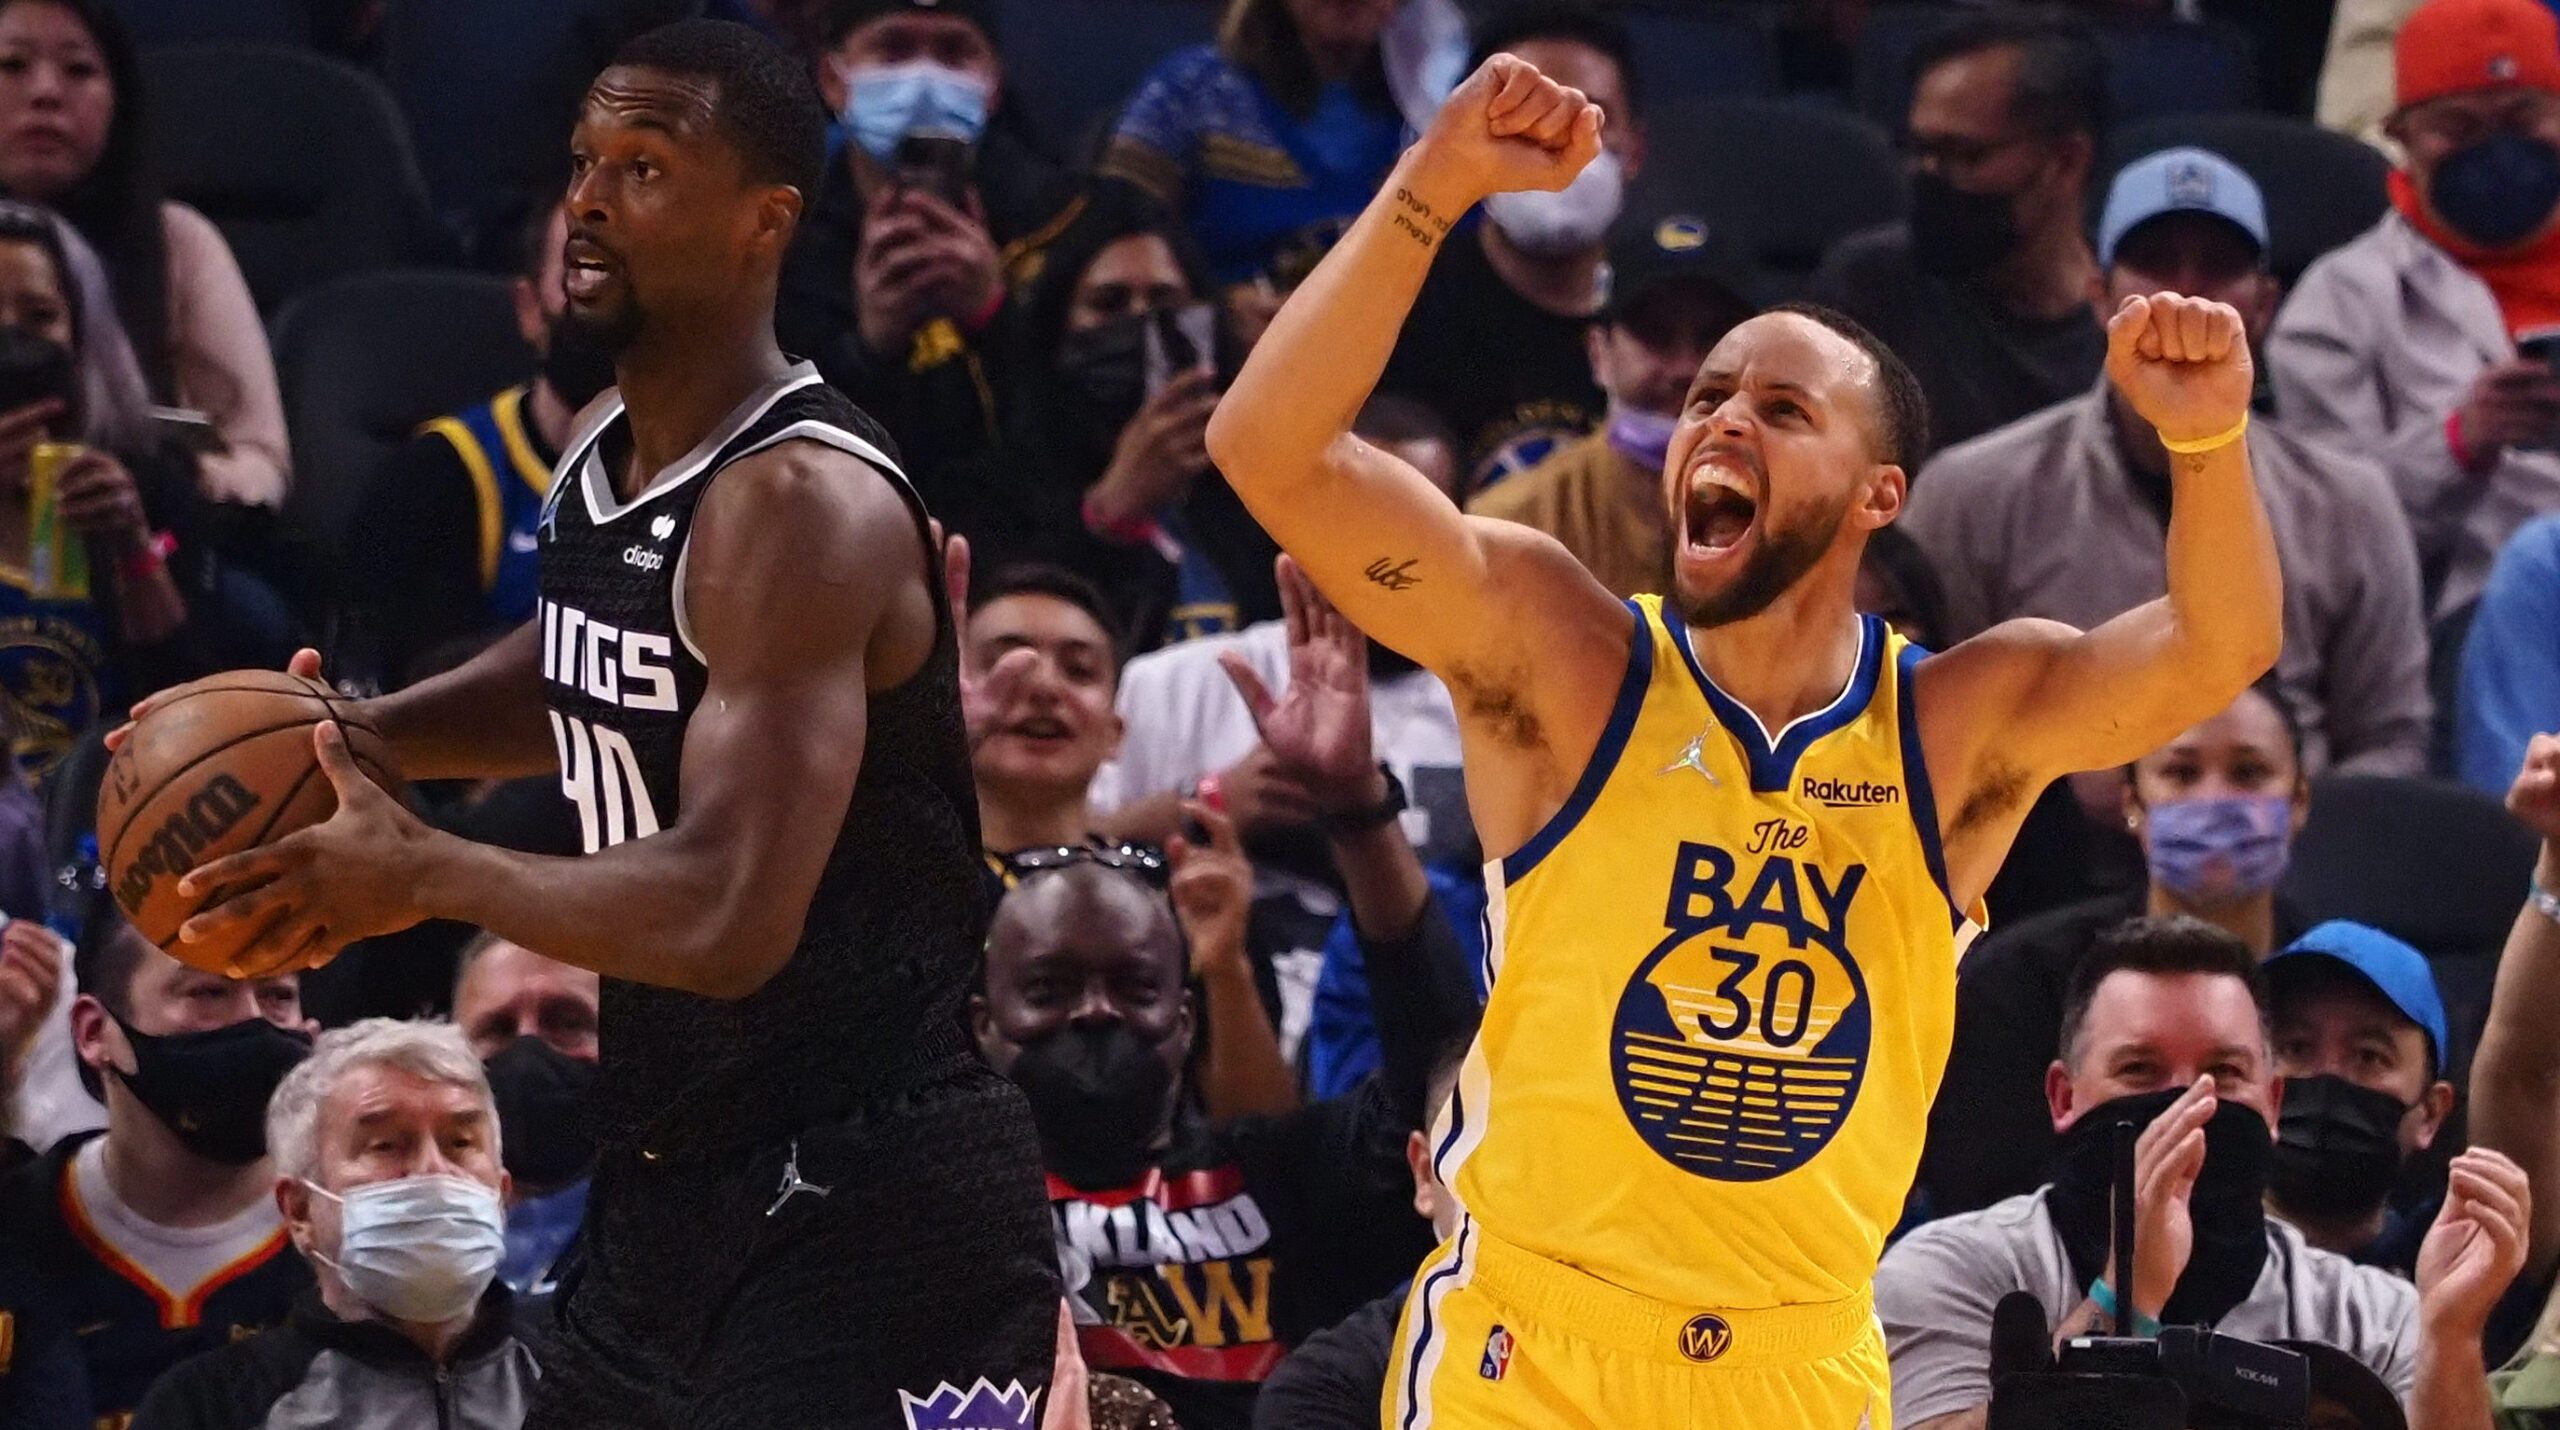 Steph Curry puts up 30 as Warriors dump Kings